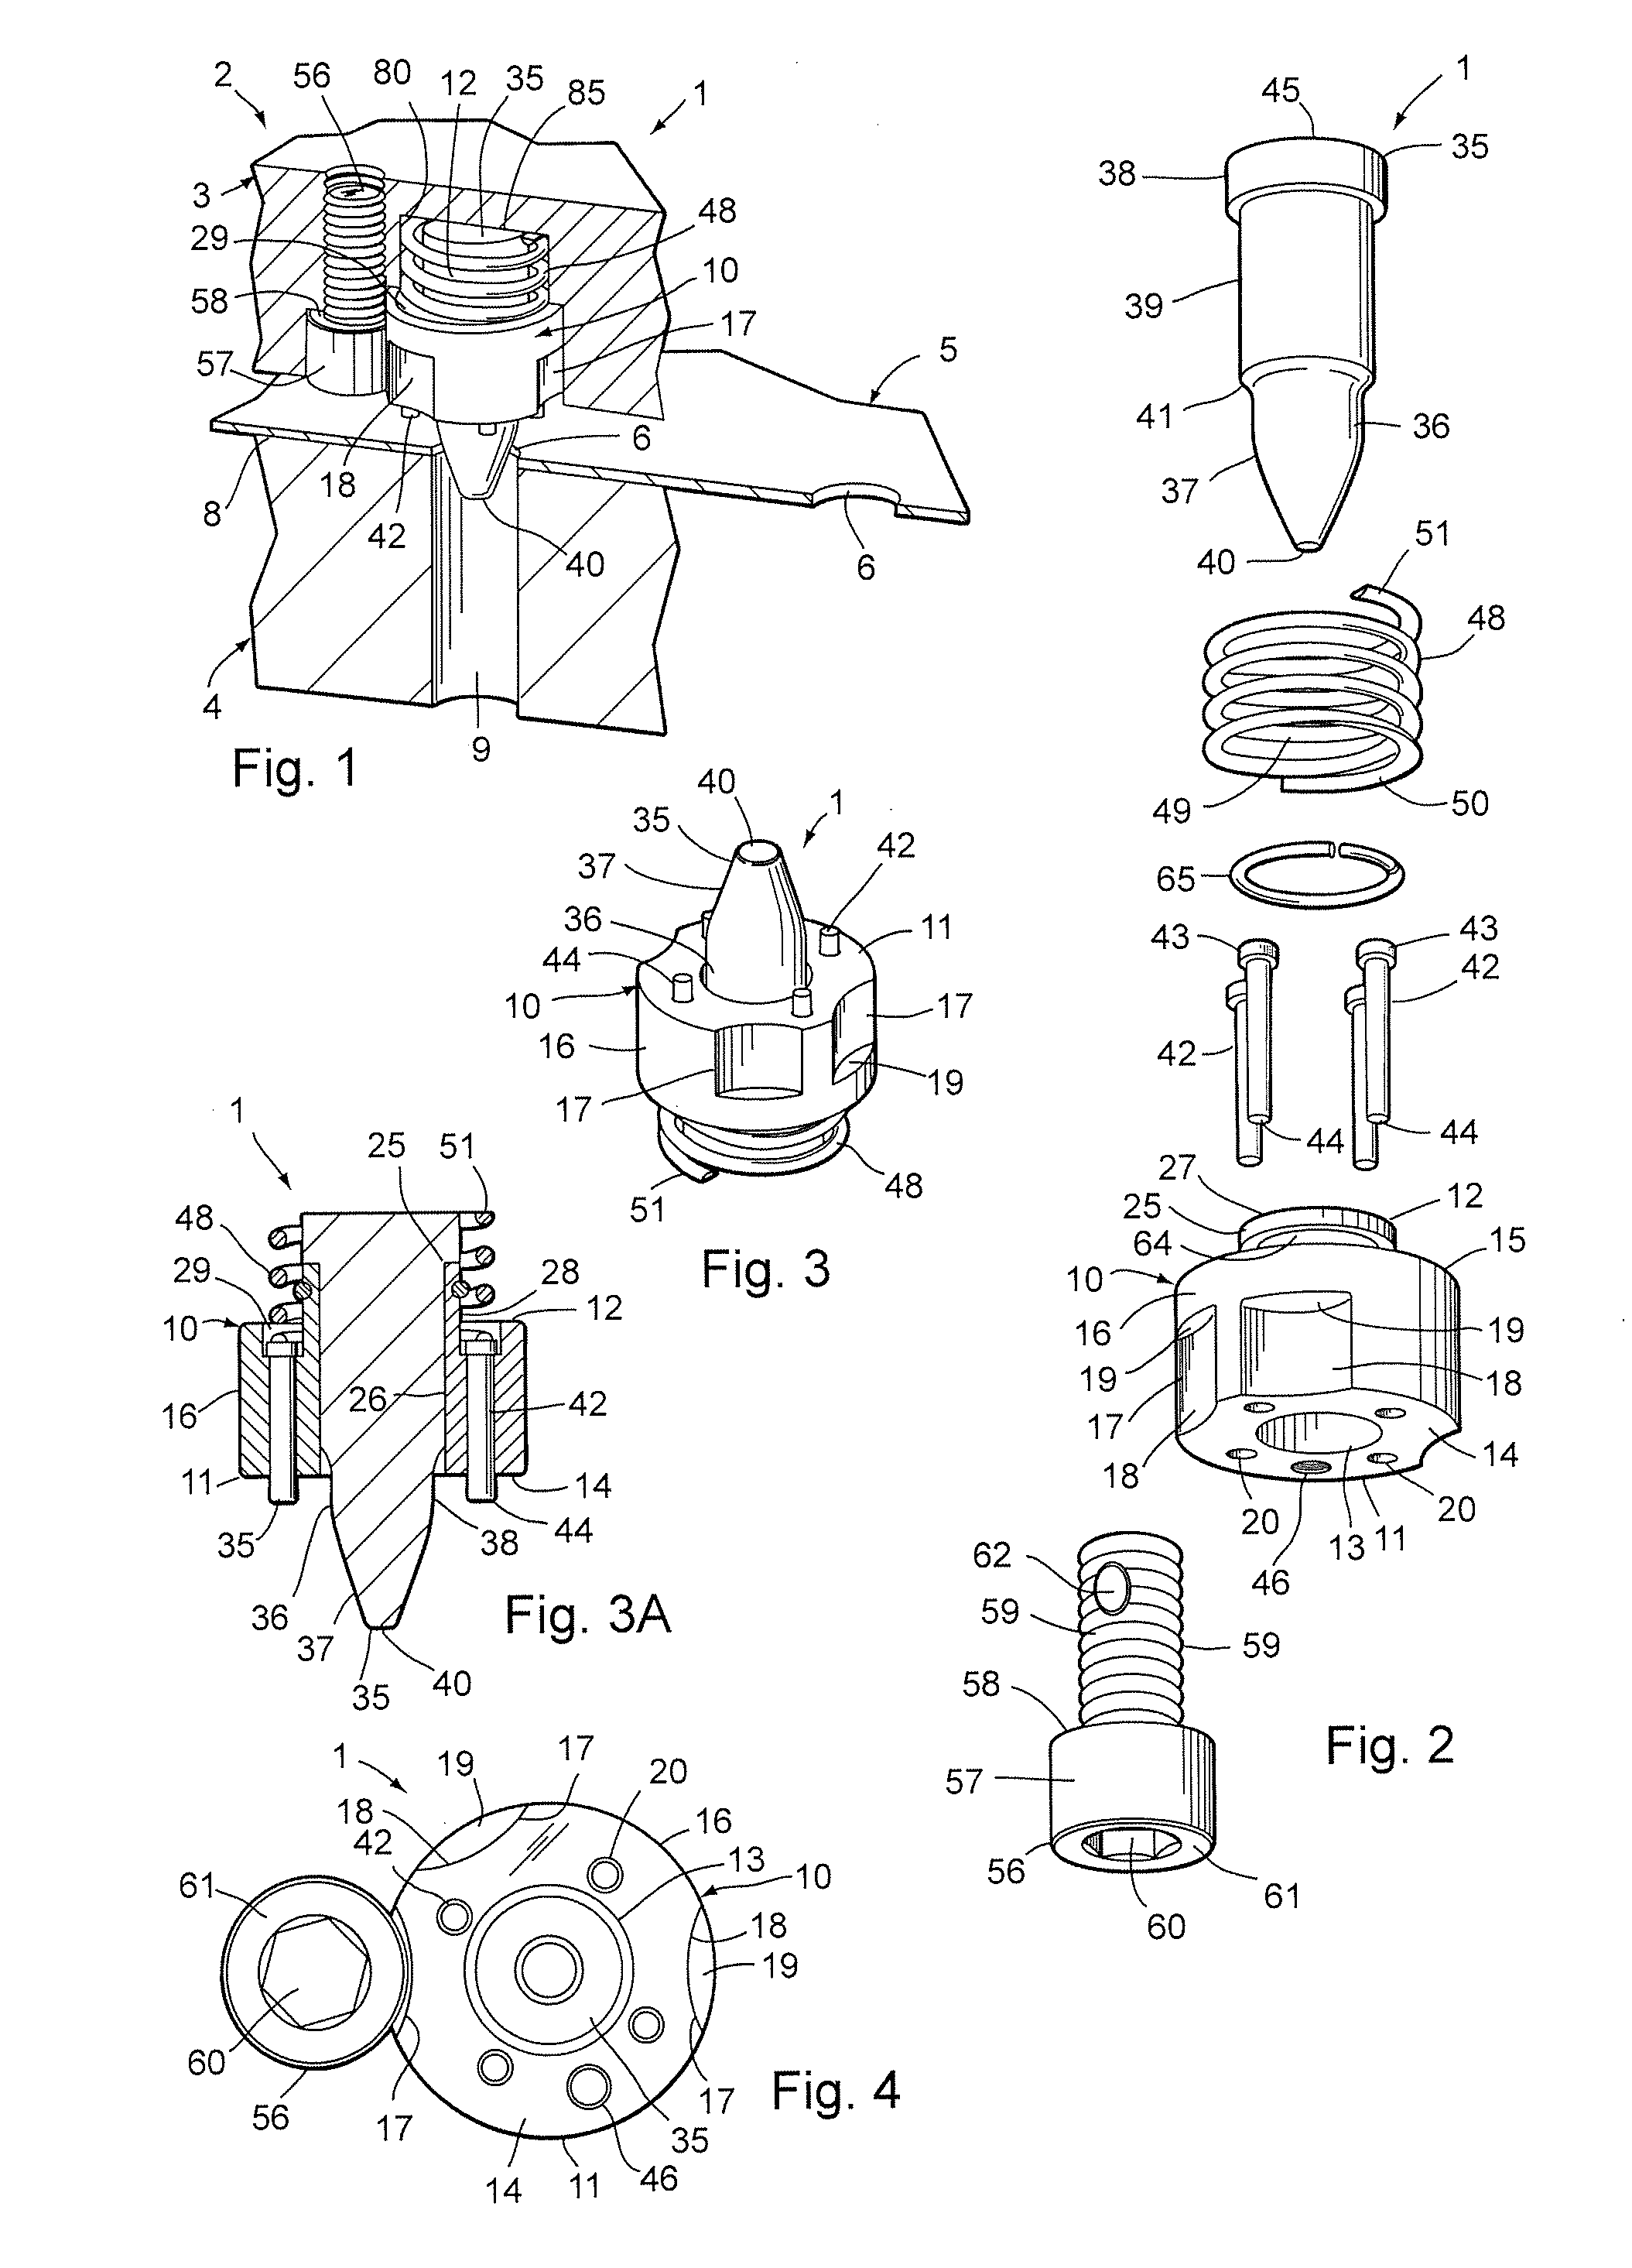 Modular pilot assembly with self-contained stripper and method for metal forming dies